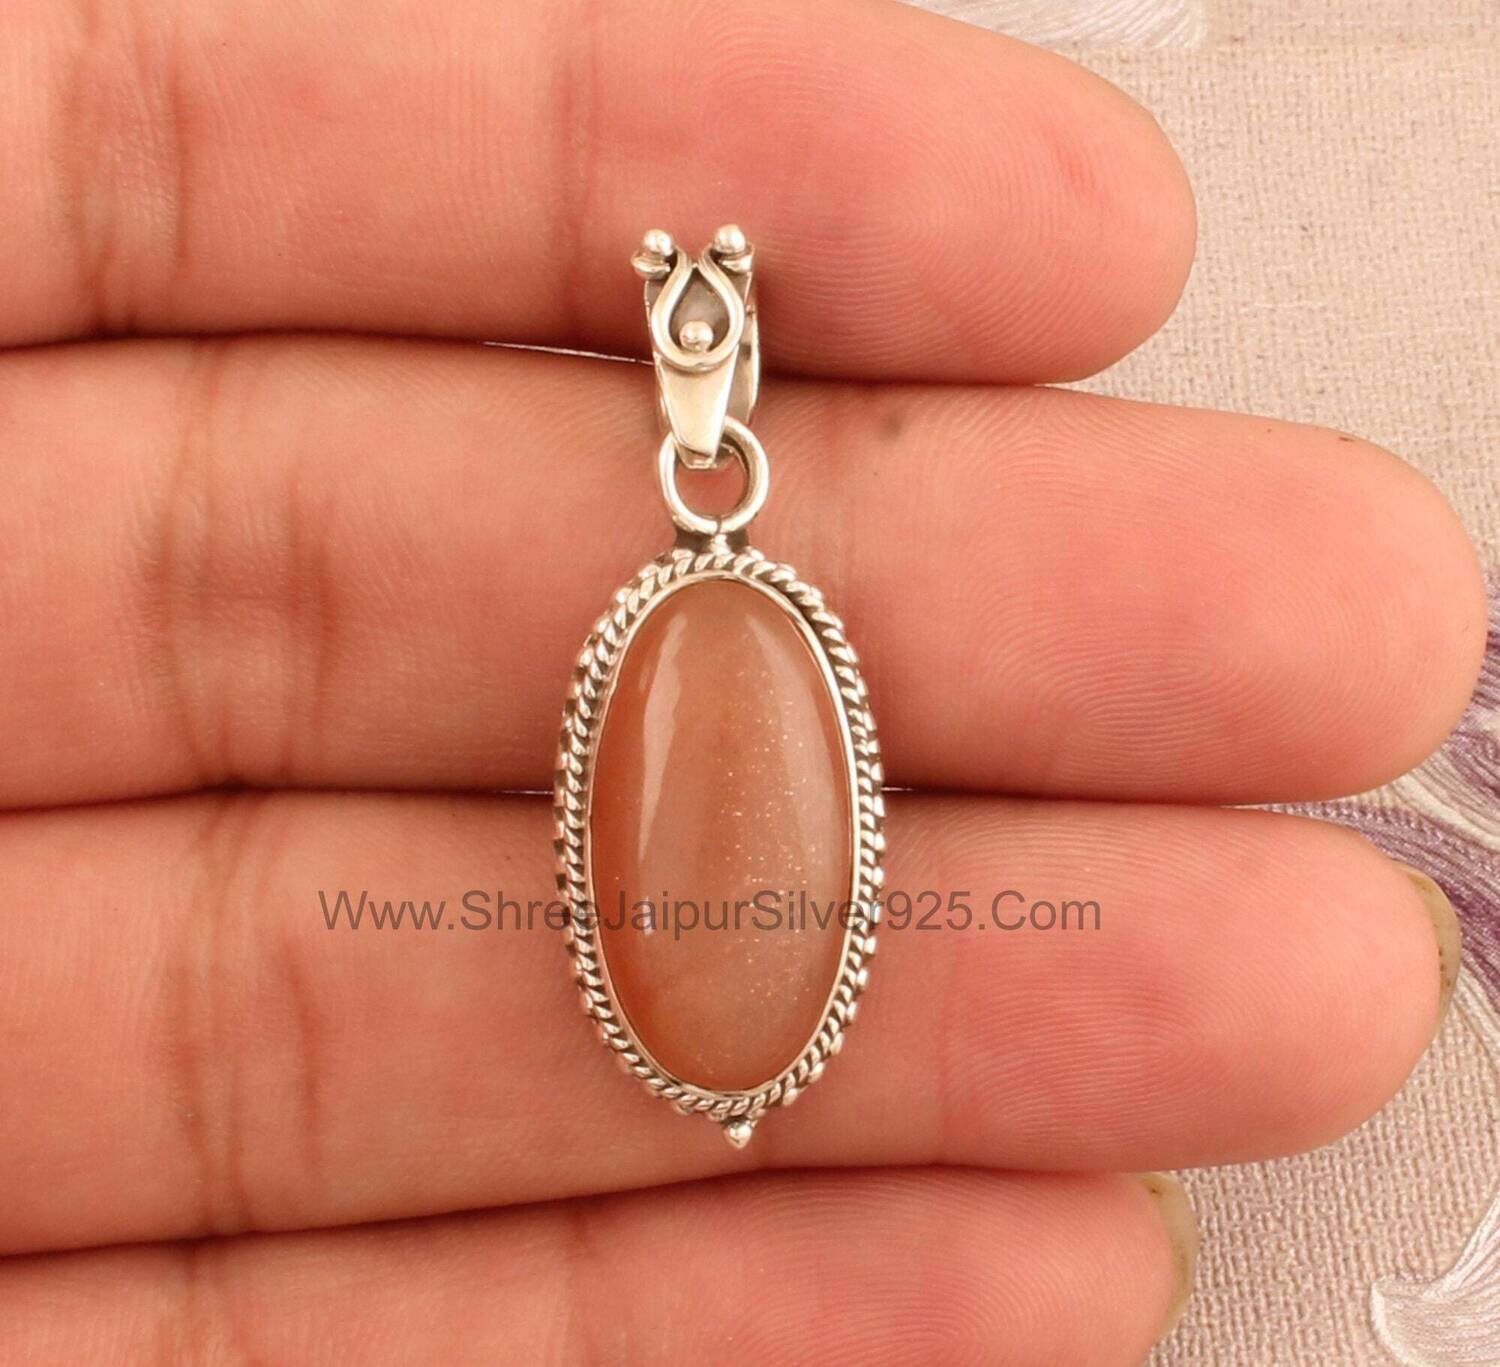 Natural Peach Moonstone Solid 925 Sterling Silver Necklace Pendant For Women, Handmade Oval Stone Pendant For Wedding Anniversary Gift Idea